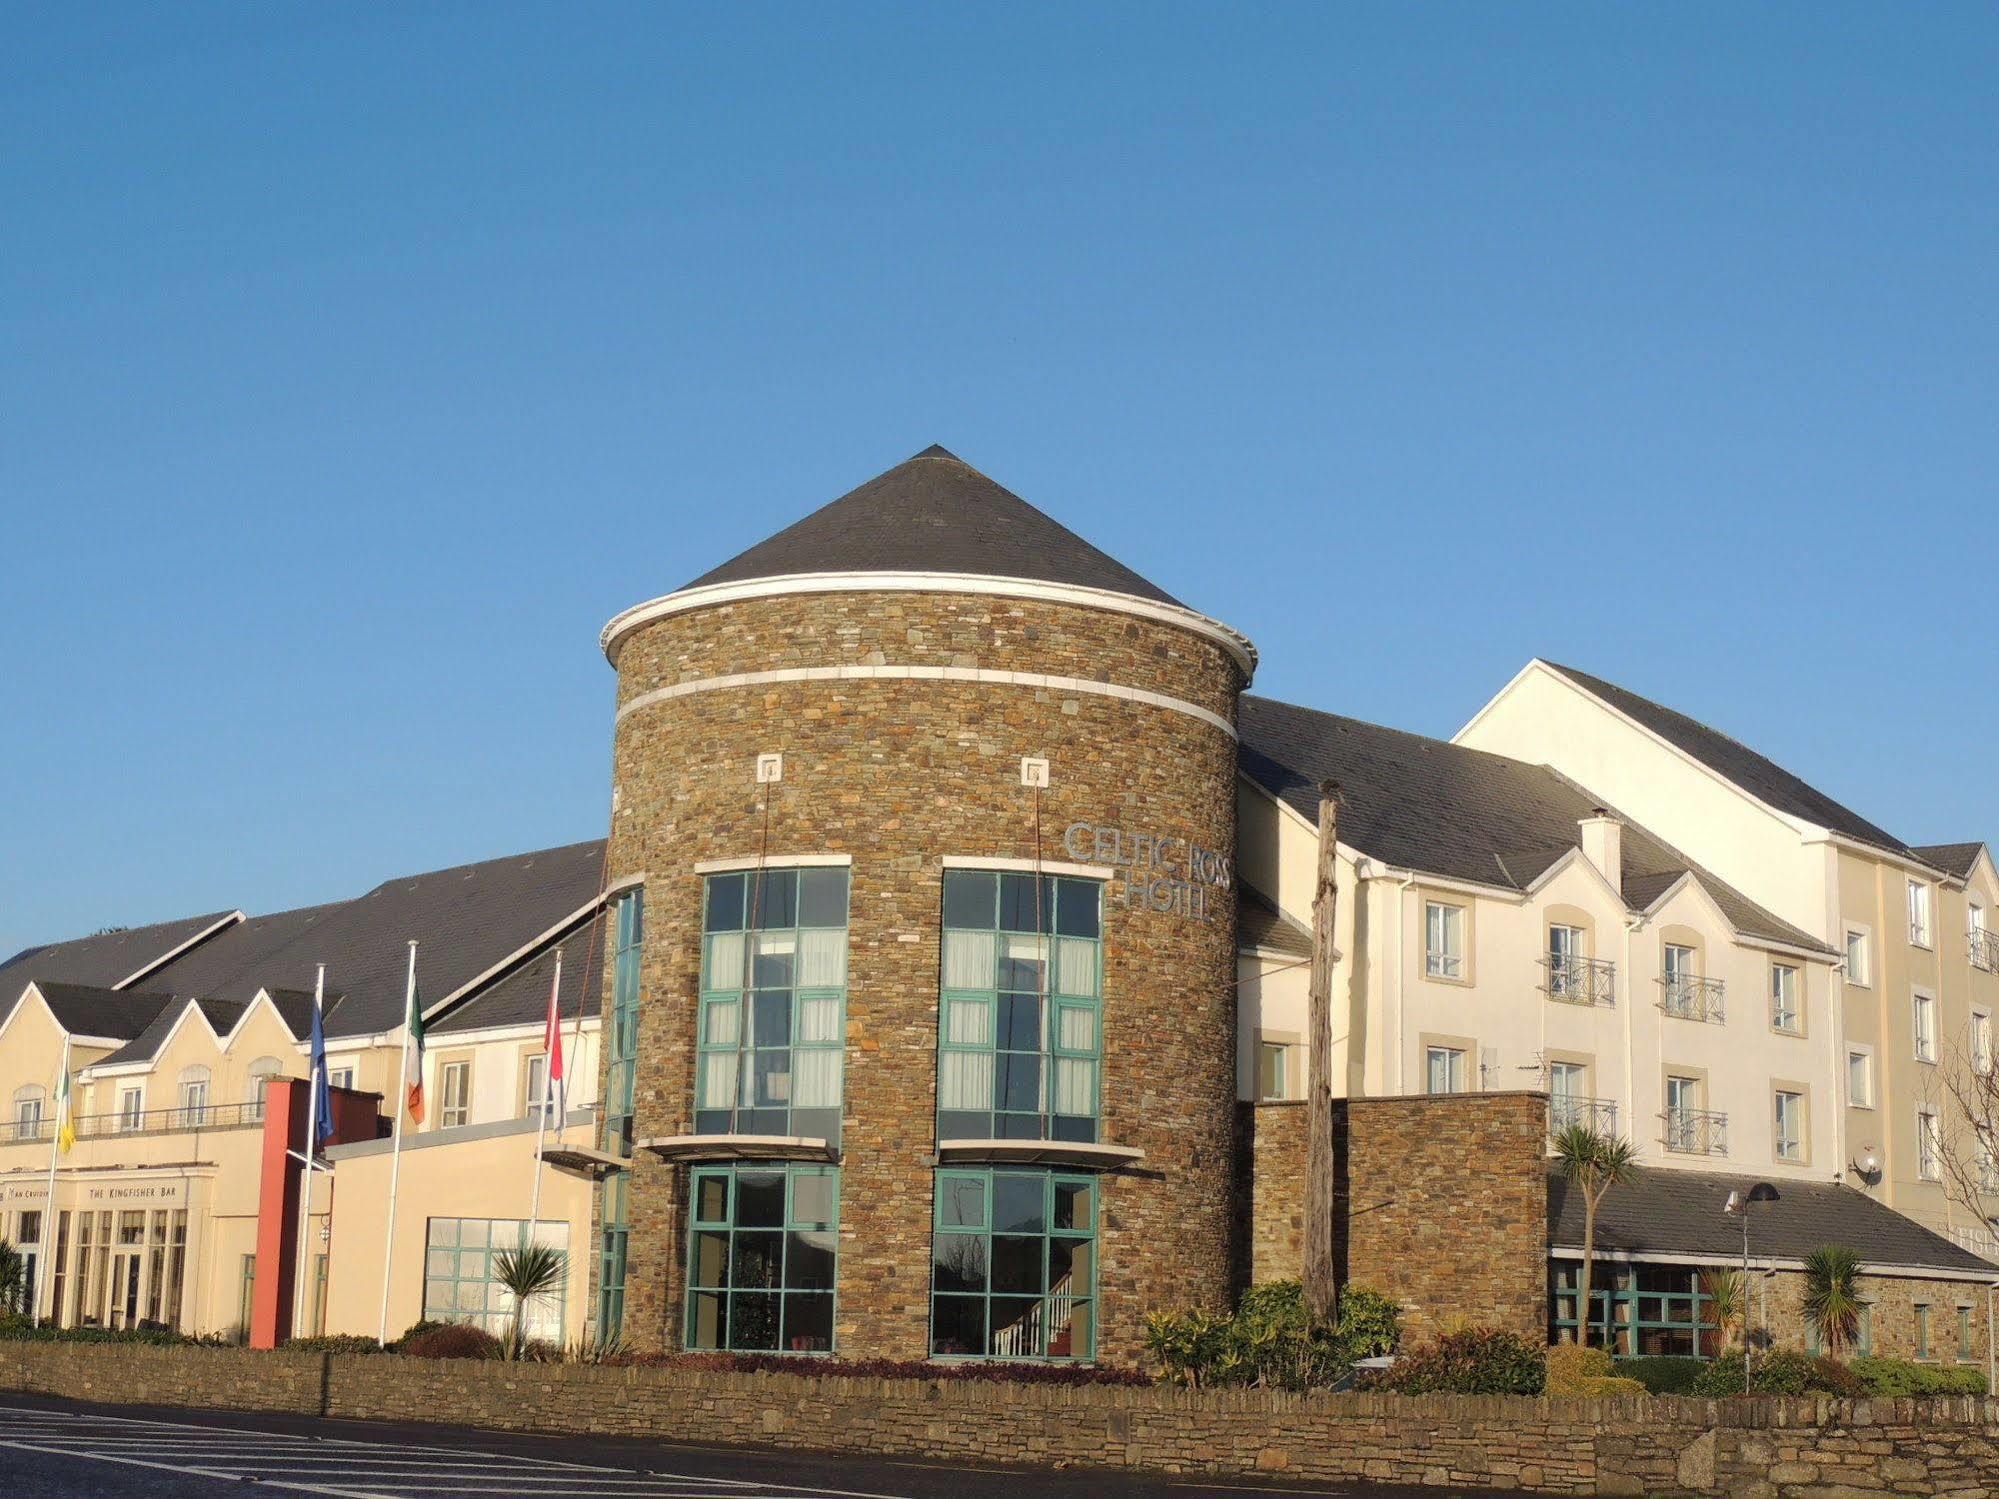 Celtic Ross Hotel & Leisure Centre Rosscarbery Exterior photo